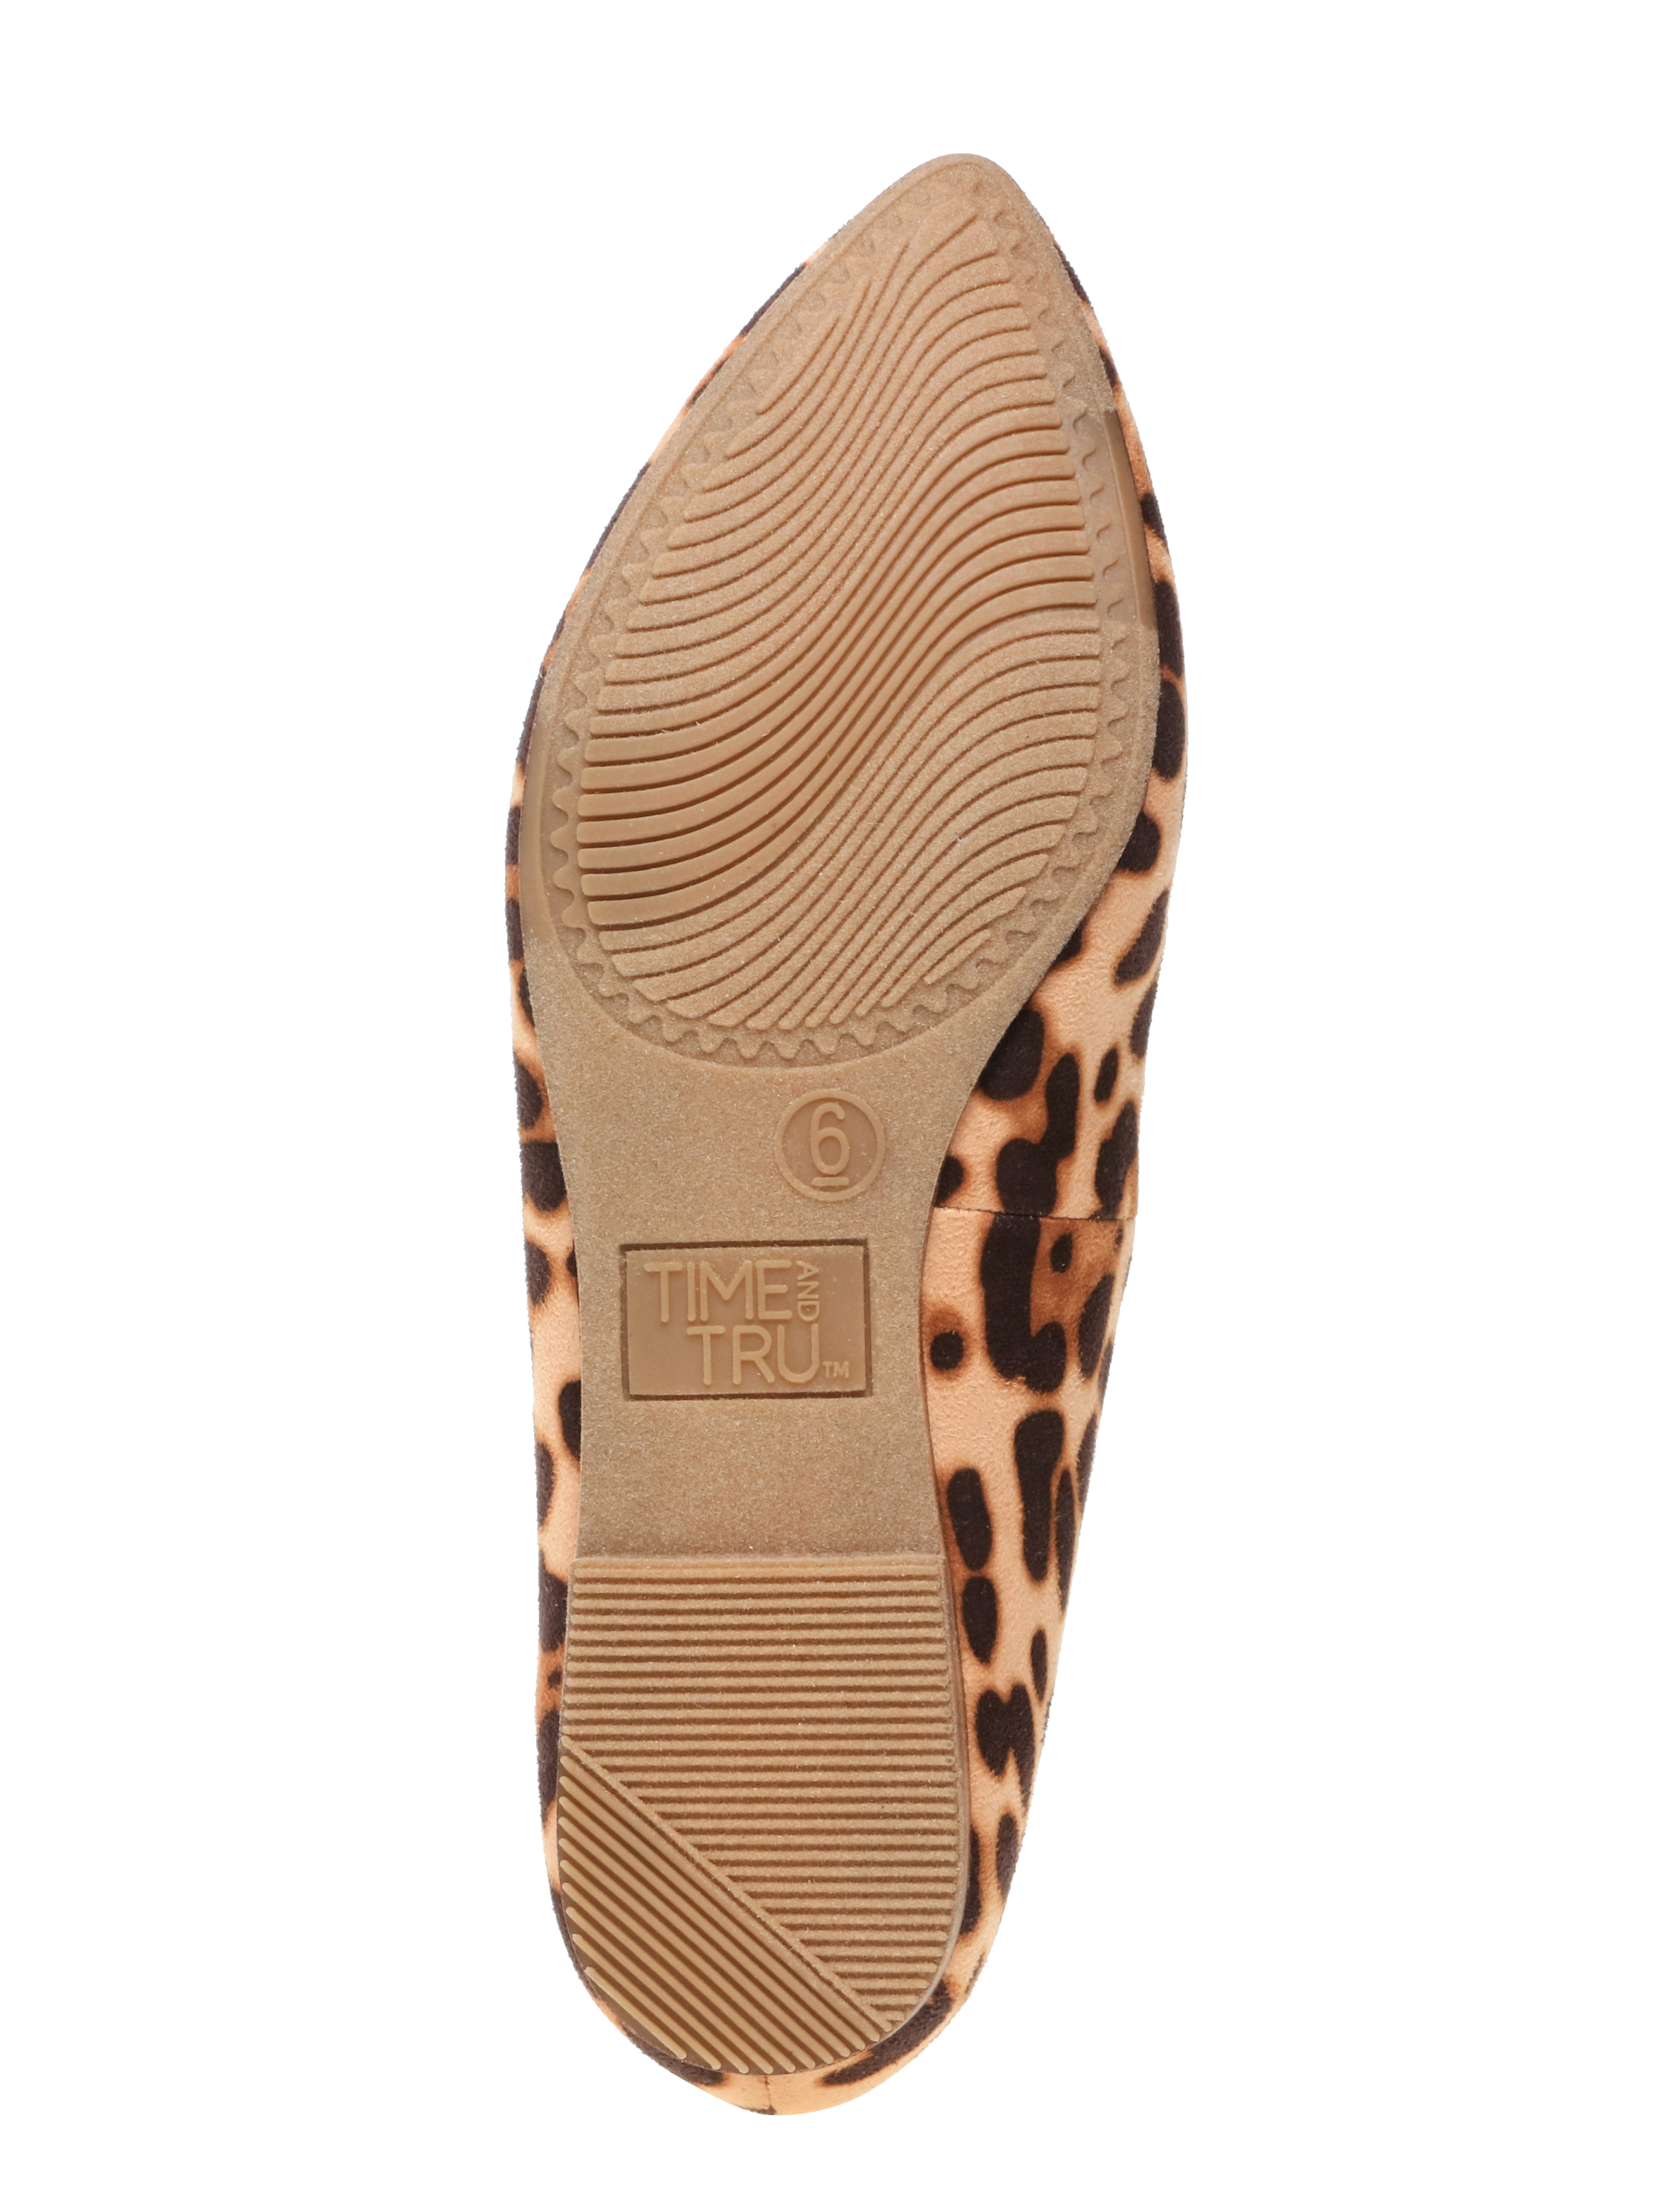 Women's Time and Tru Animal Print Feather Flat - image 3 of 6